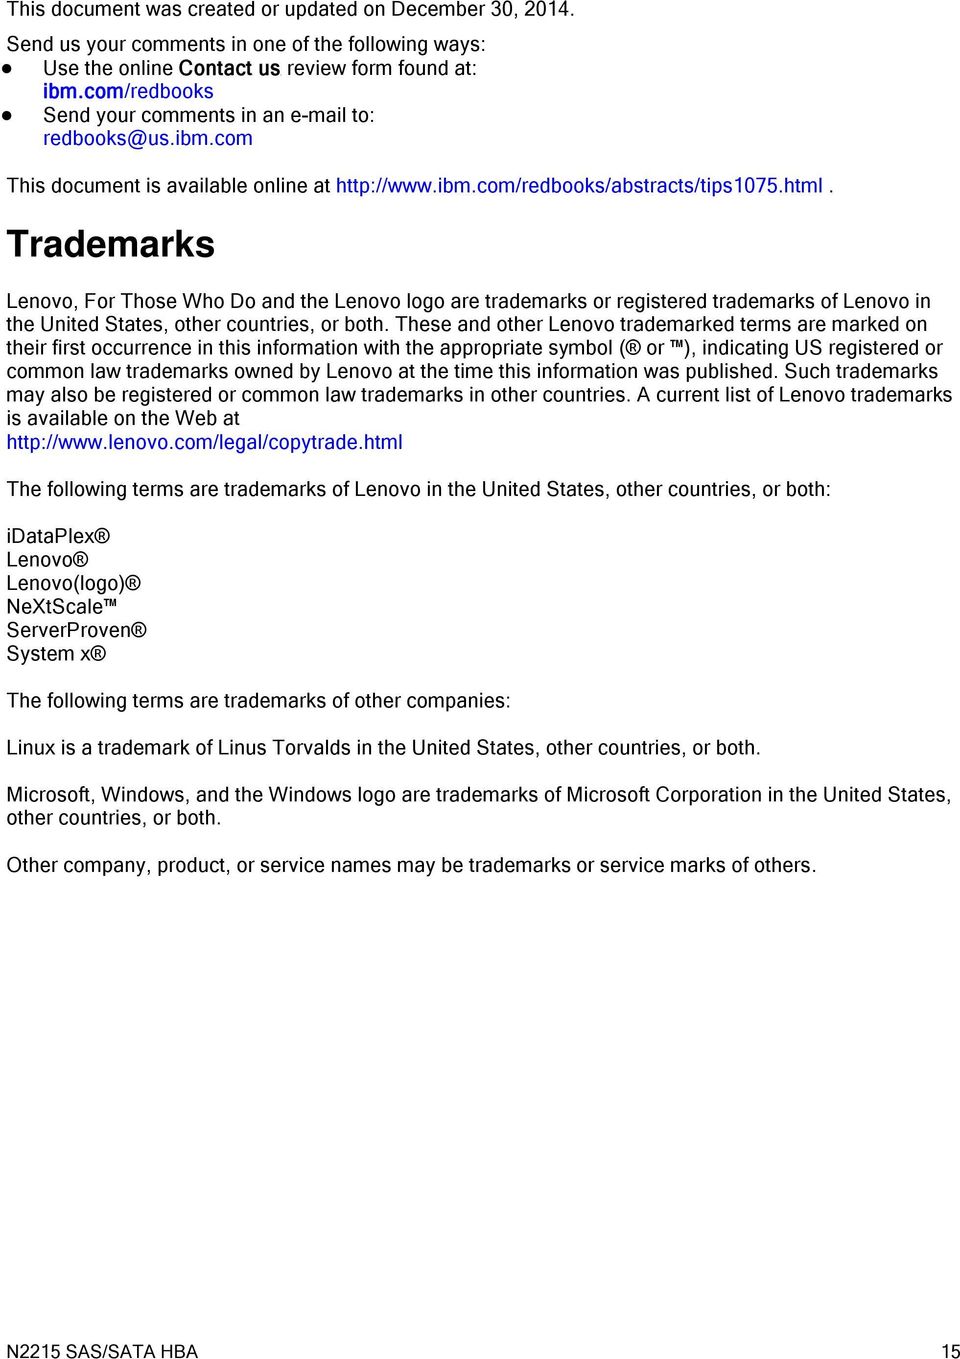 Trademarks Lenovo, For Those Who Do and the Lenovo logo are trademarks or registered trademarks of Lenovo in the United States, other countries, or both.